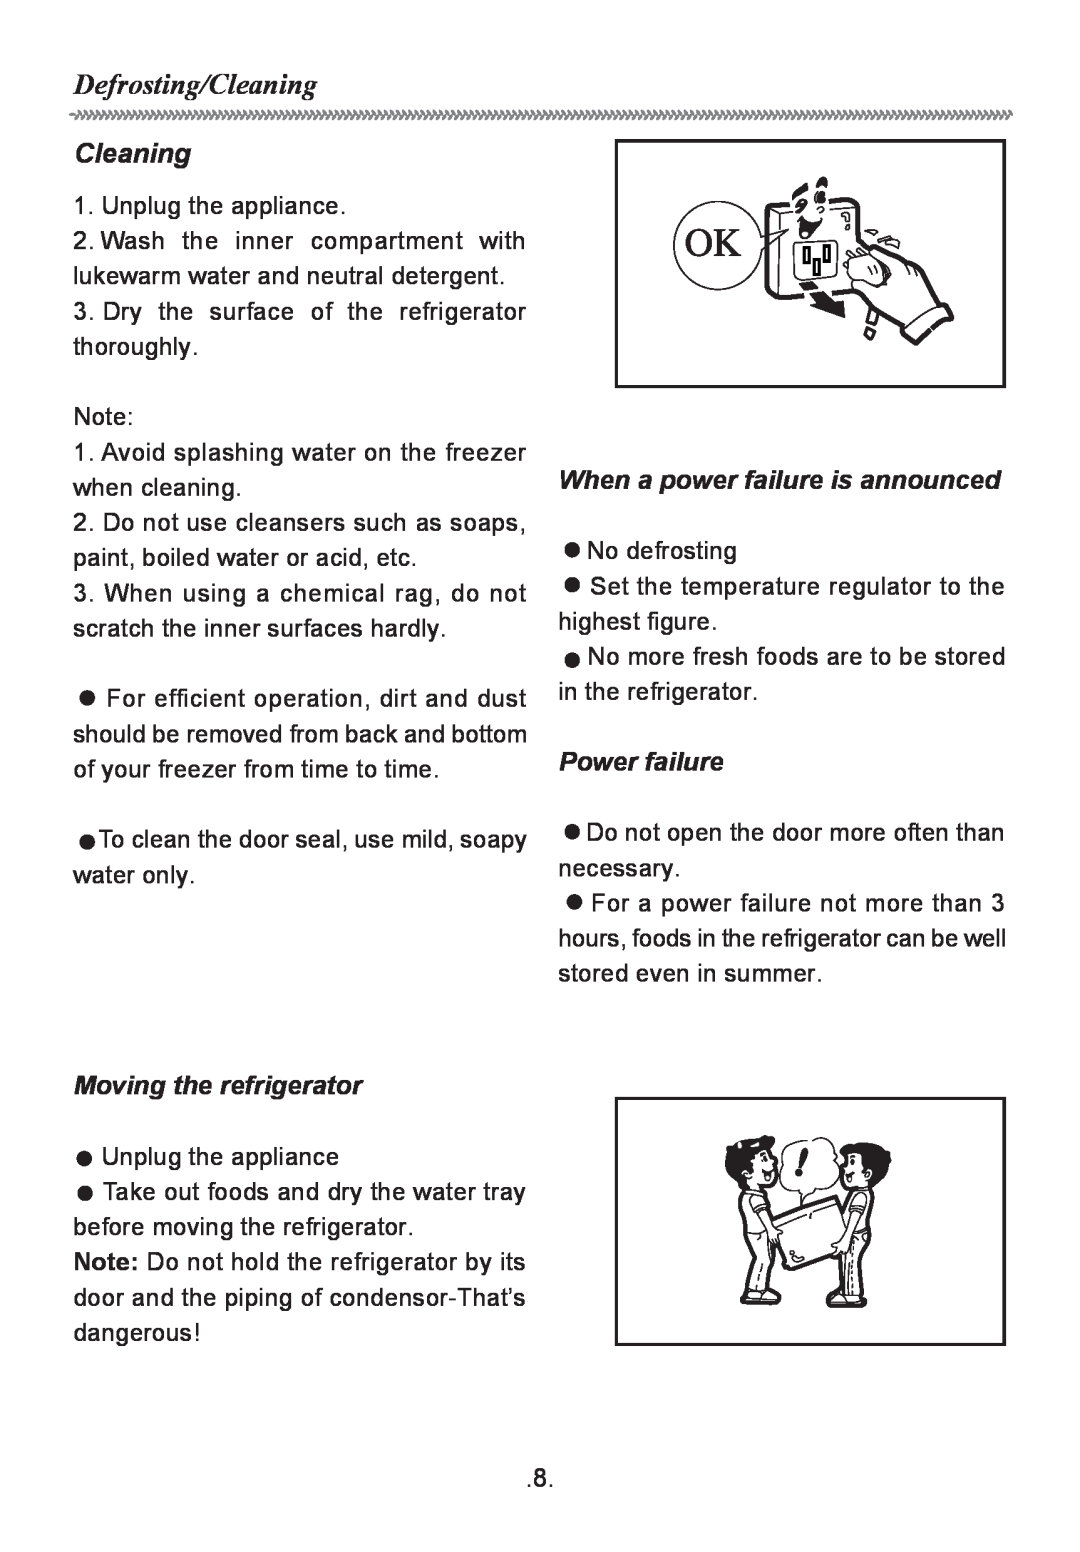 Haier HR-126 manual When a power failure is announced, Power failure, Moving the refrigerator, Defrosting/Cleaning 